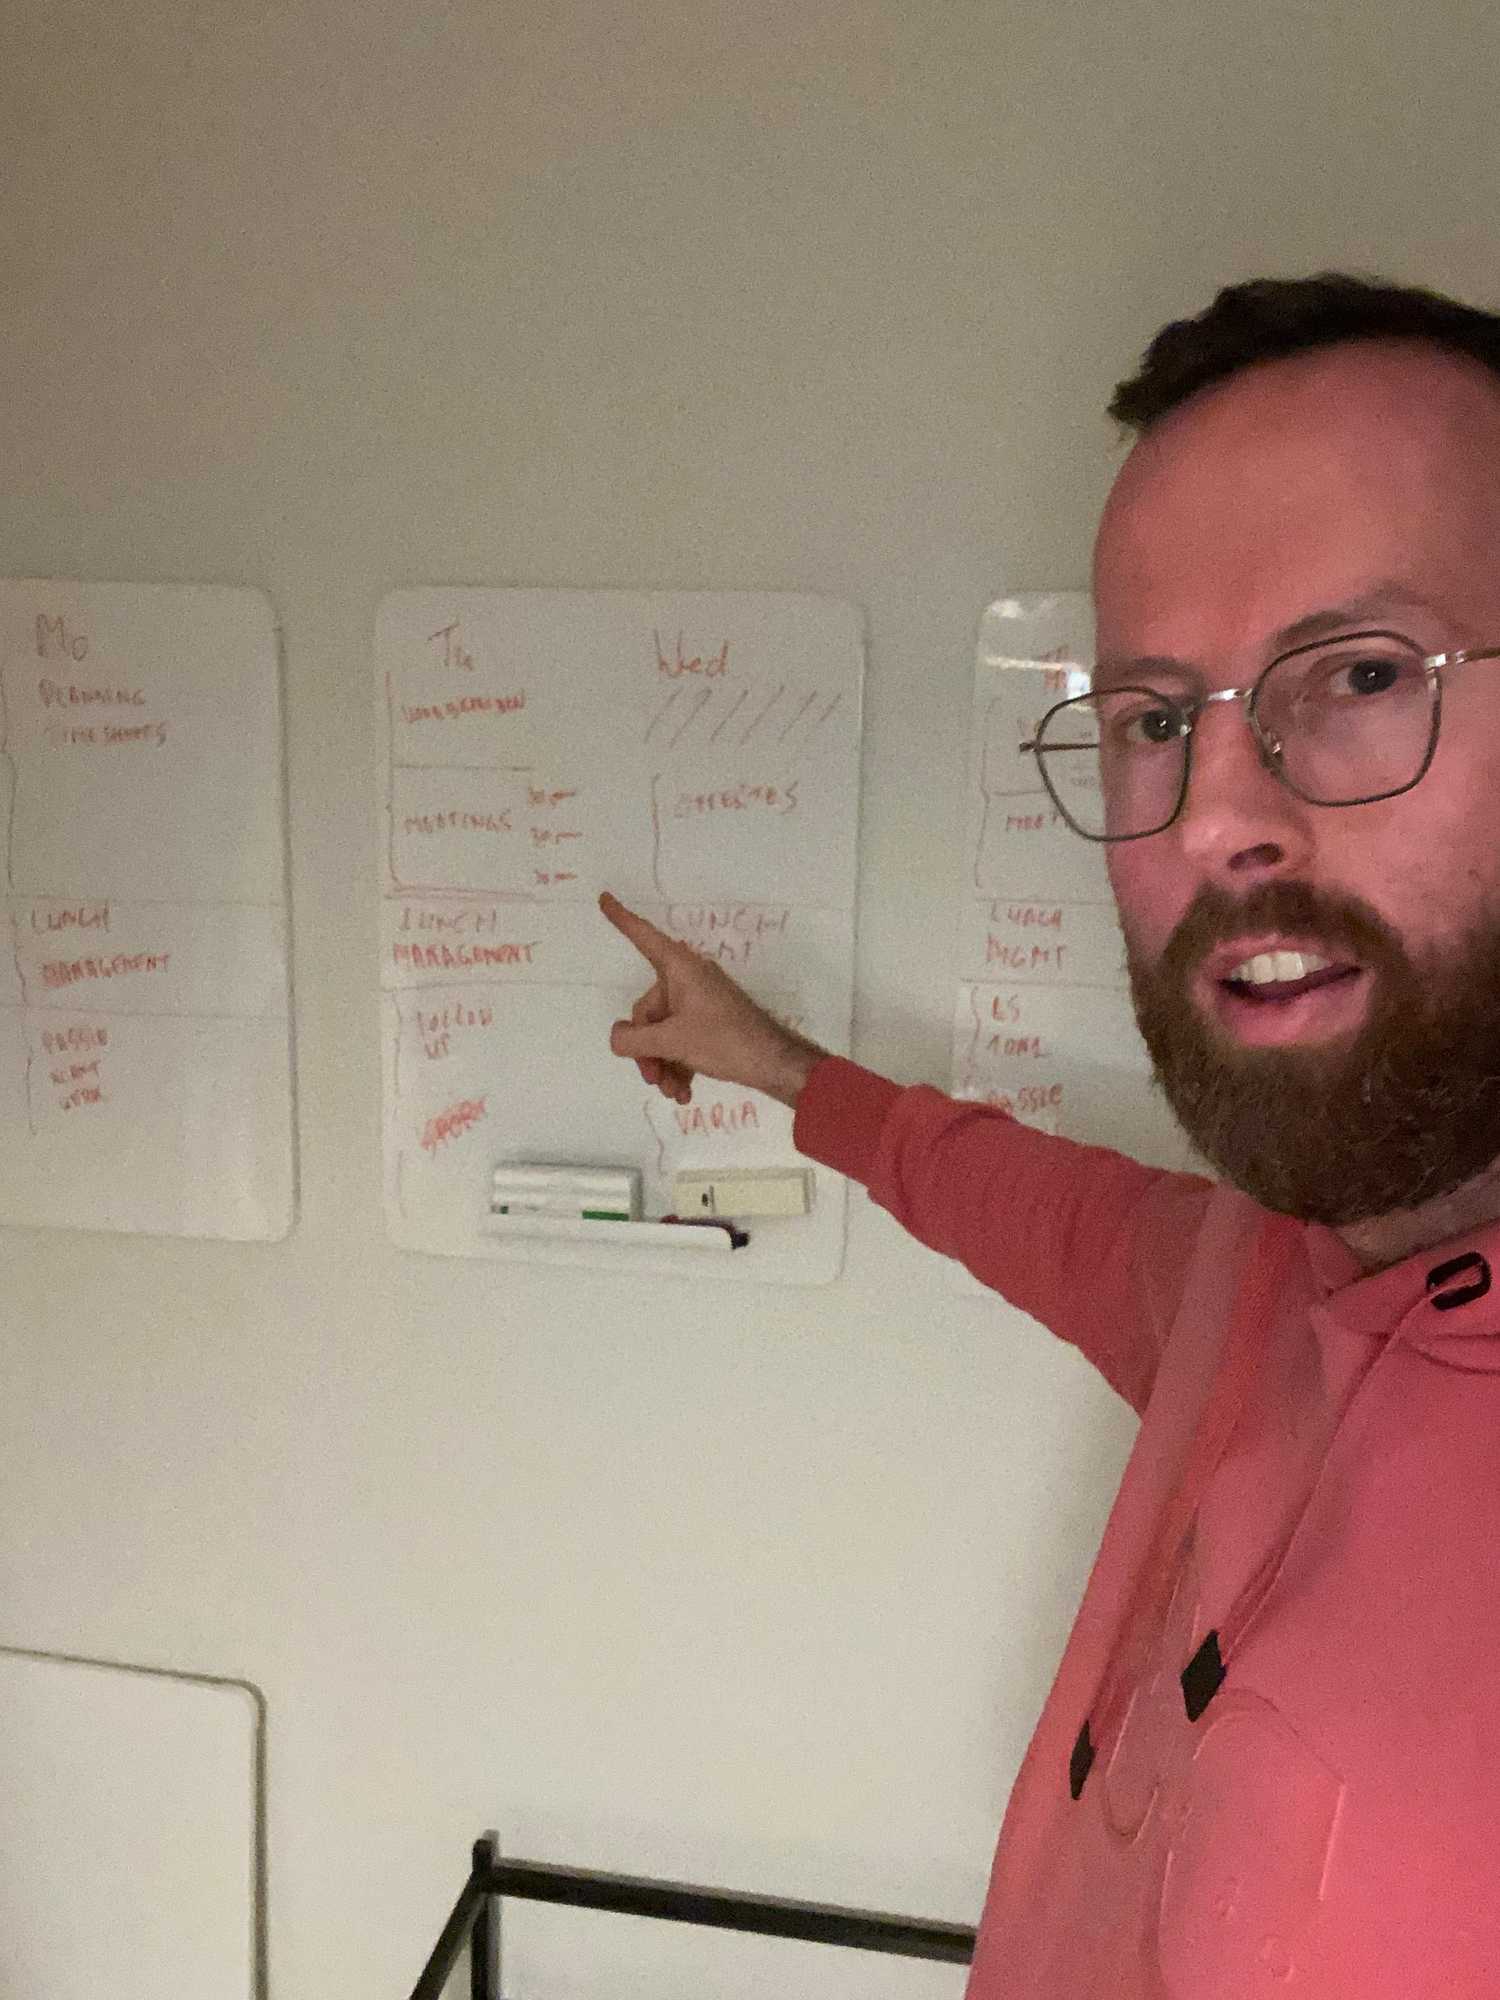 Titanology CEO Stefaan points to a whiteboard with an updated ideal time schedule for CEO Roel